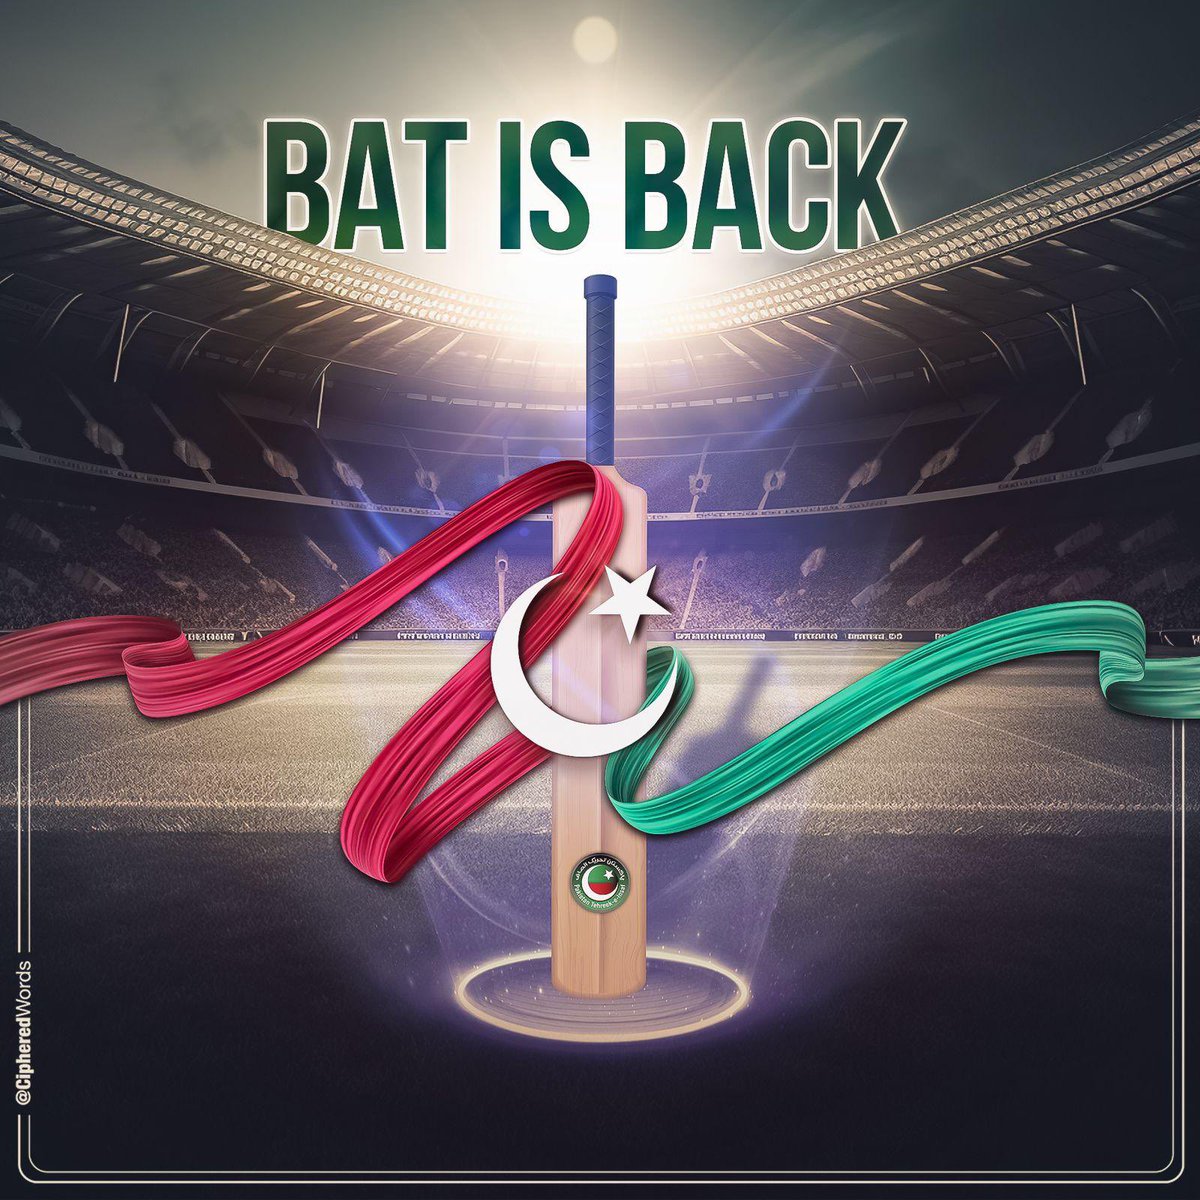 BAT 🏏 is back and ready to score huge sixes on 8th February! 🗳️ #ساڈا_بلا_بھاری_ہے